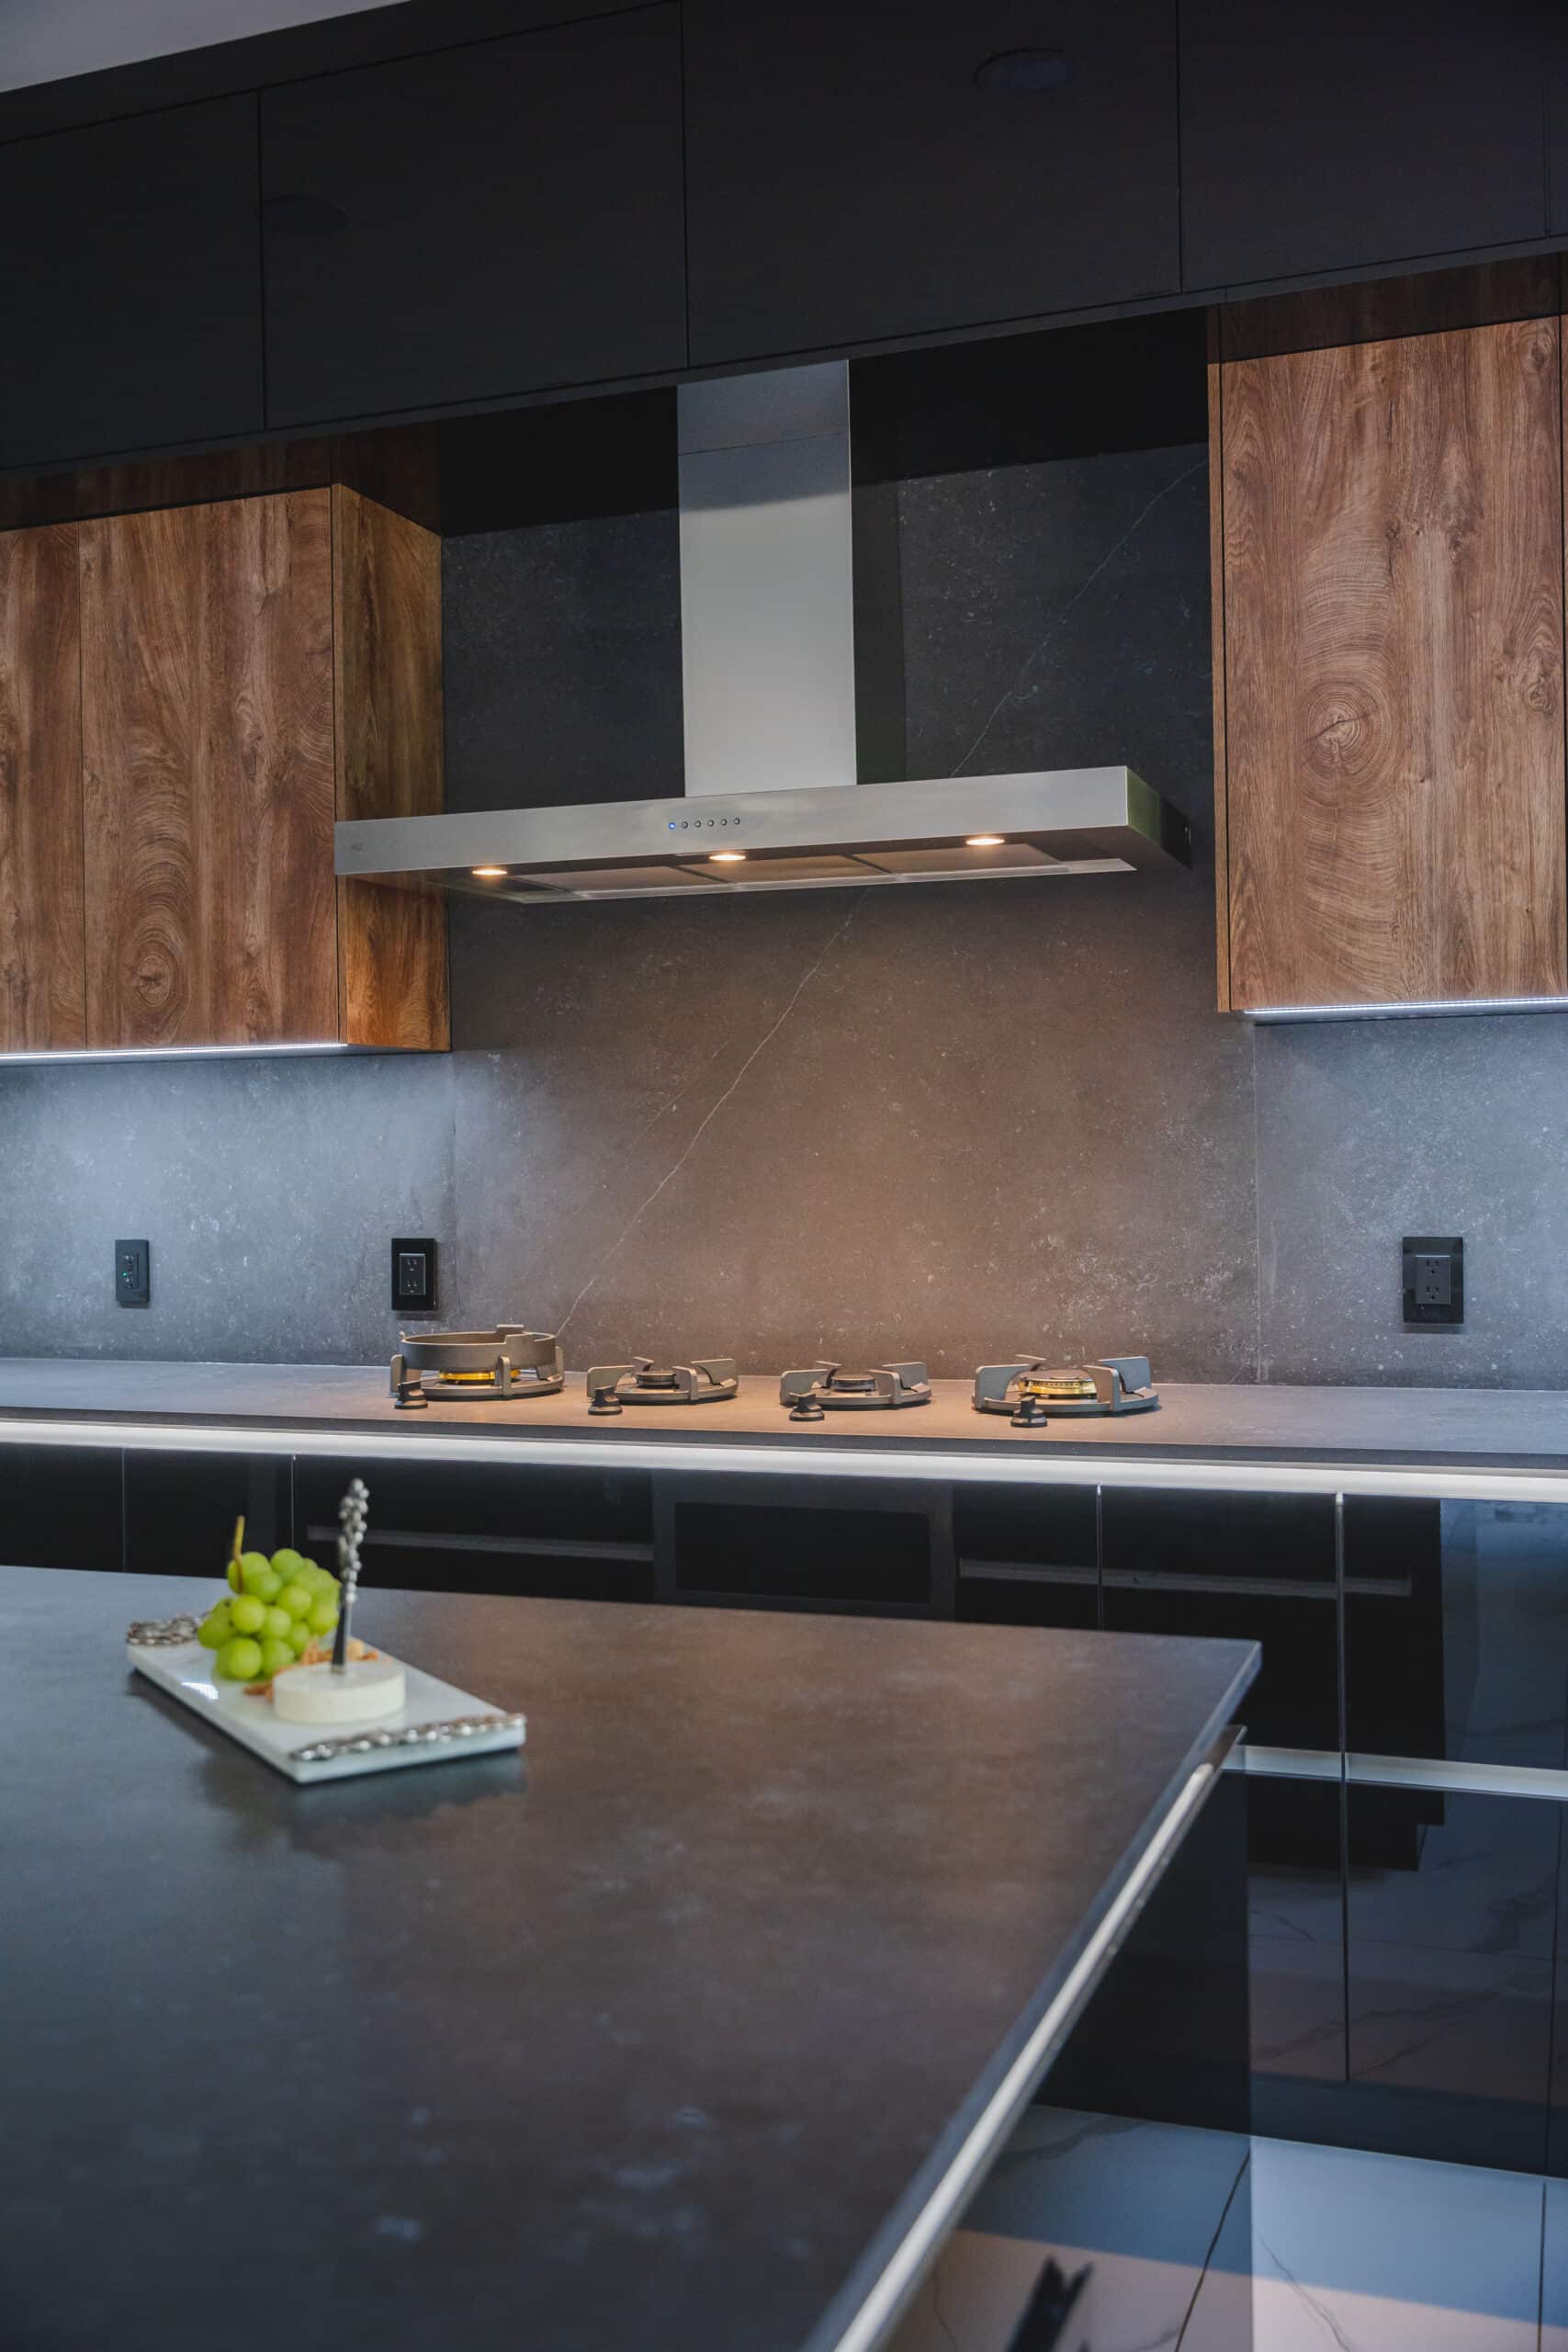 A kitchen with a sleek black countertops